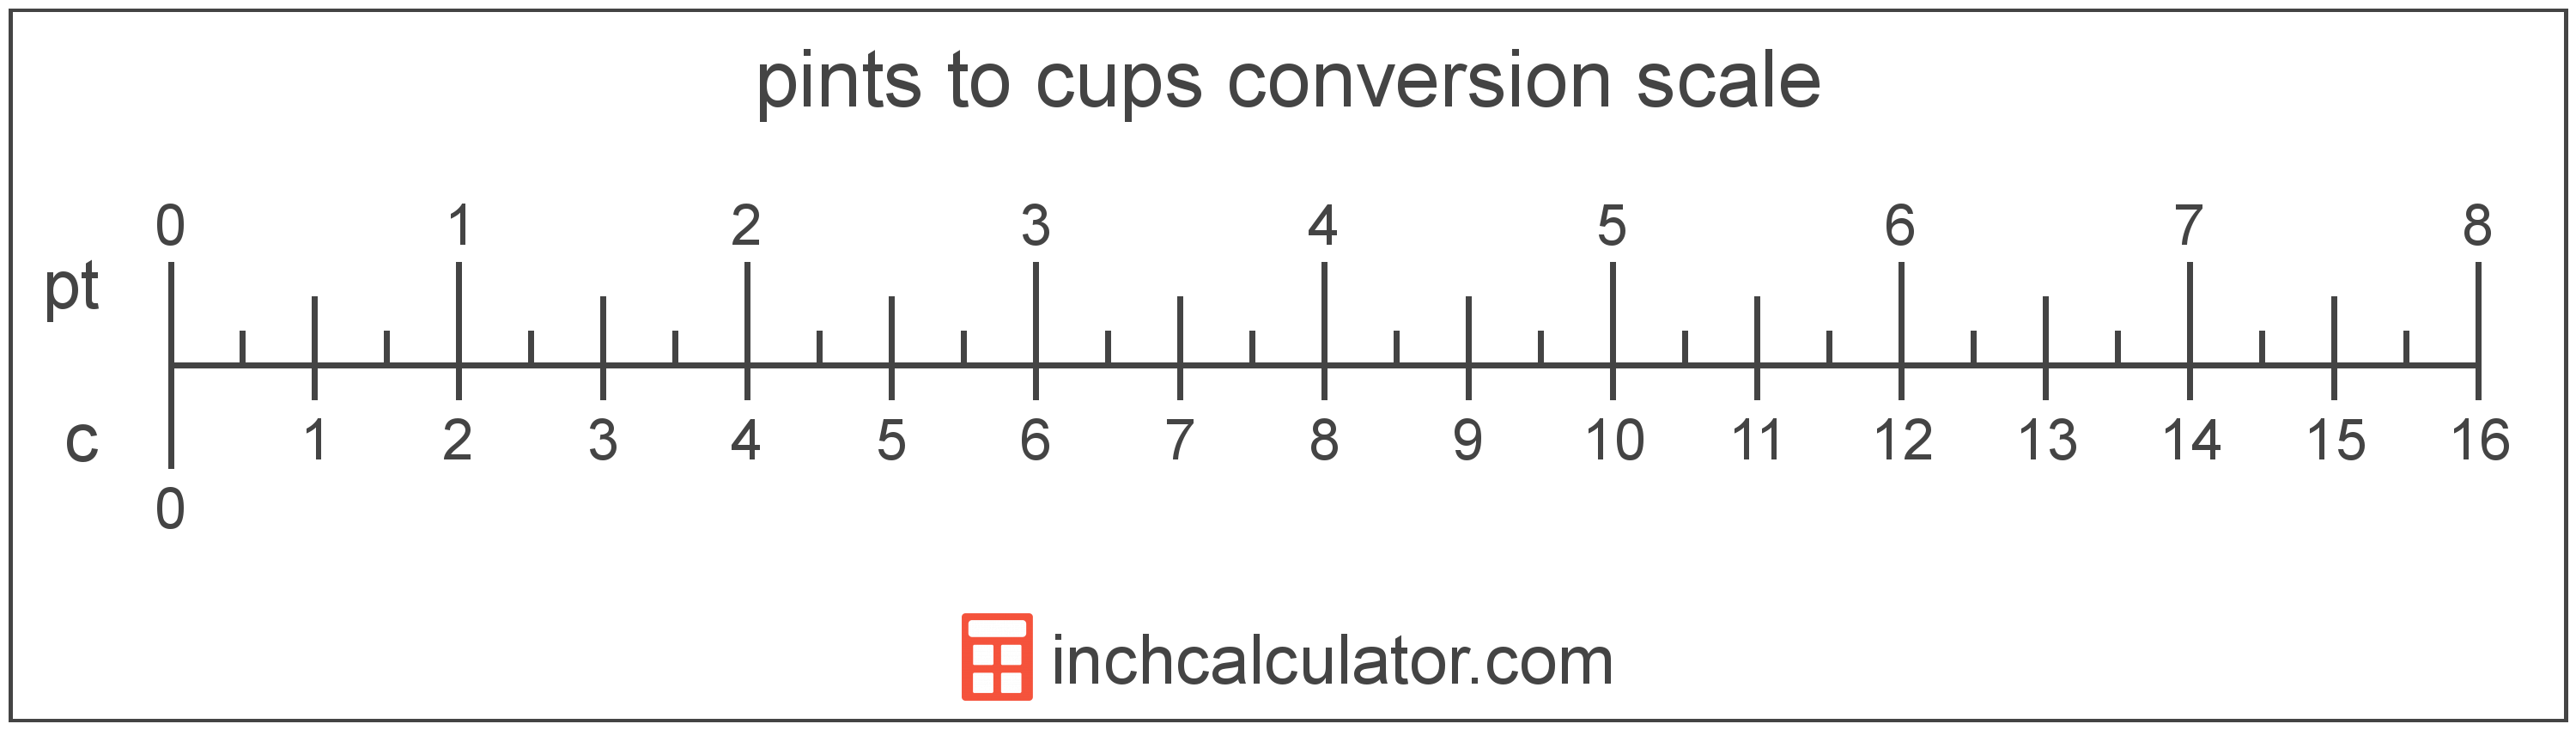 Conversion Chart Pints To Cups